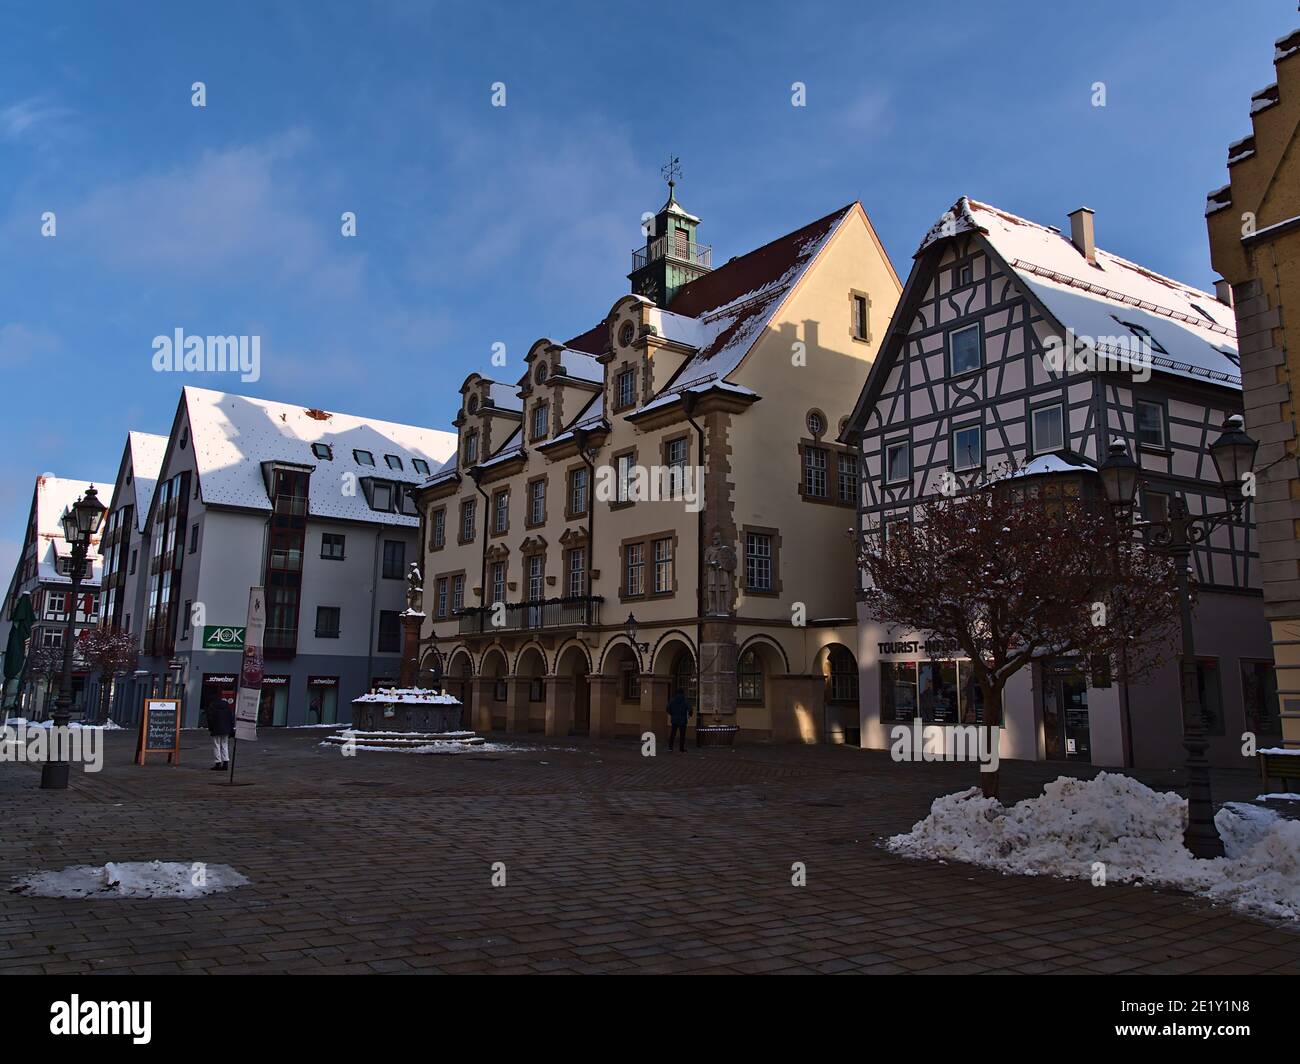 Sigmaringen, Germany - 01-09-2021: Historic town hall with yellow painted facade located at a square in pedestrian zone in city center. Stock Photo